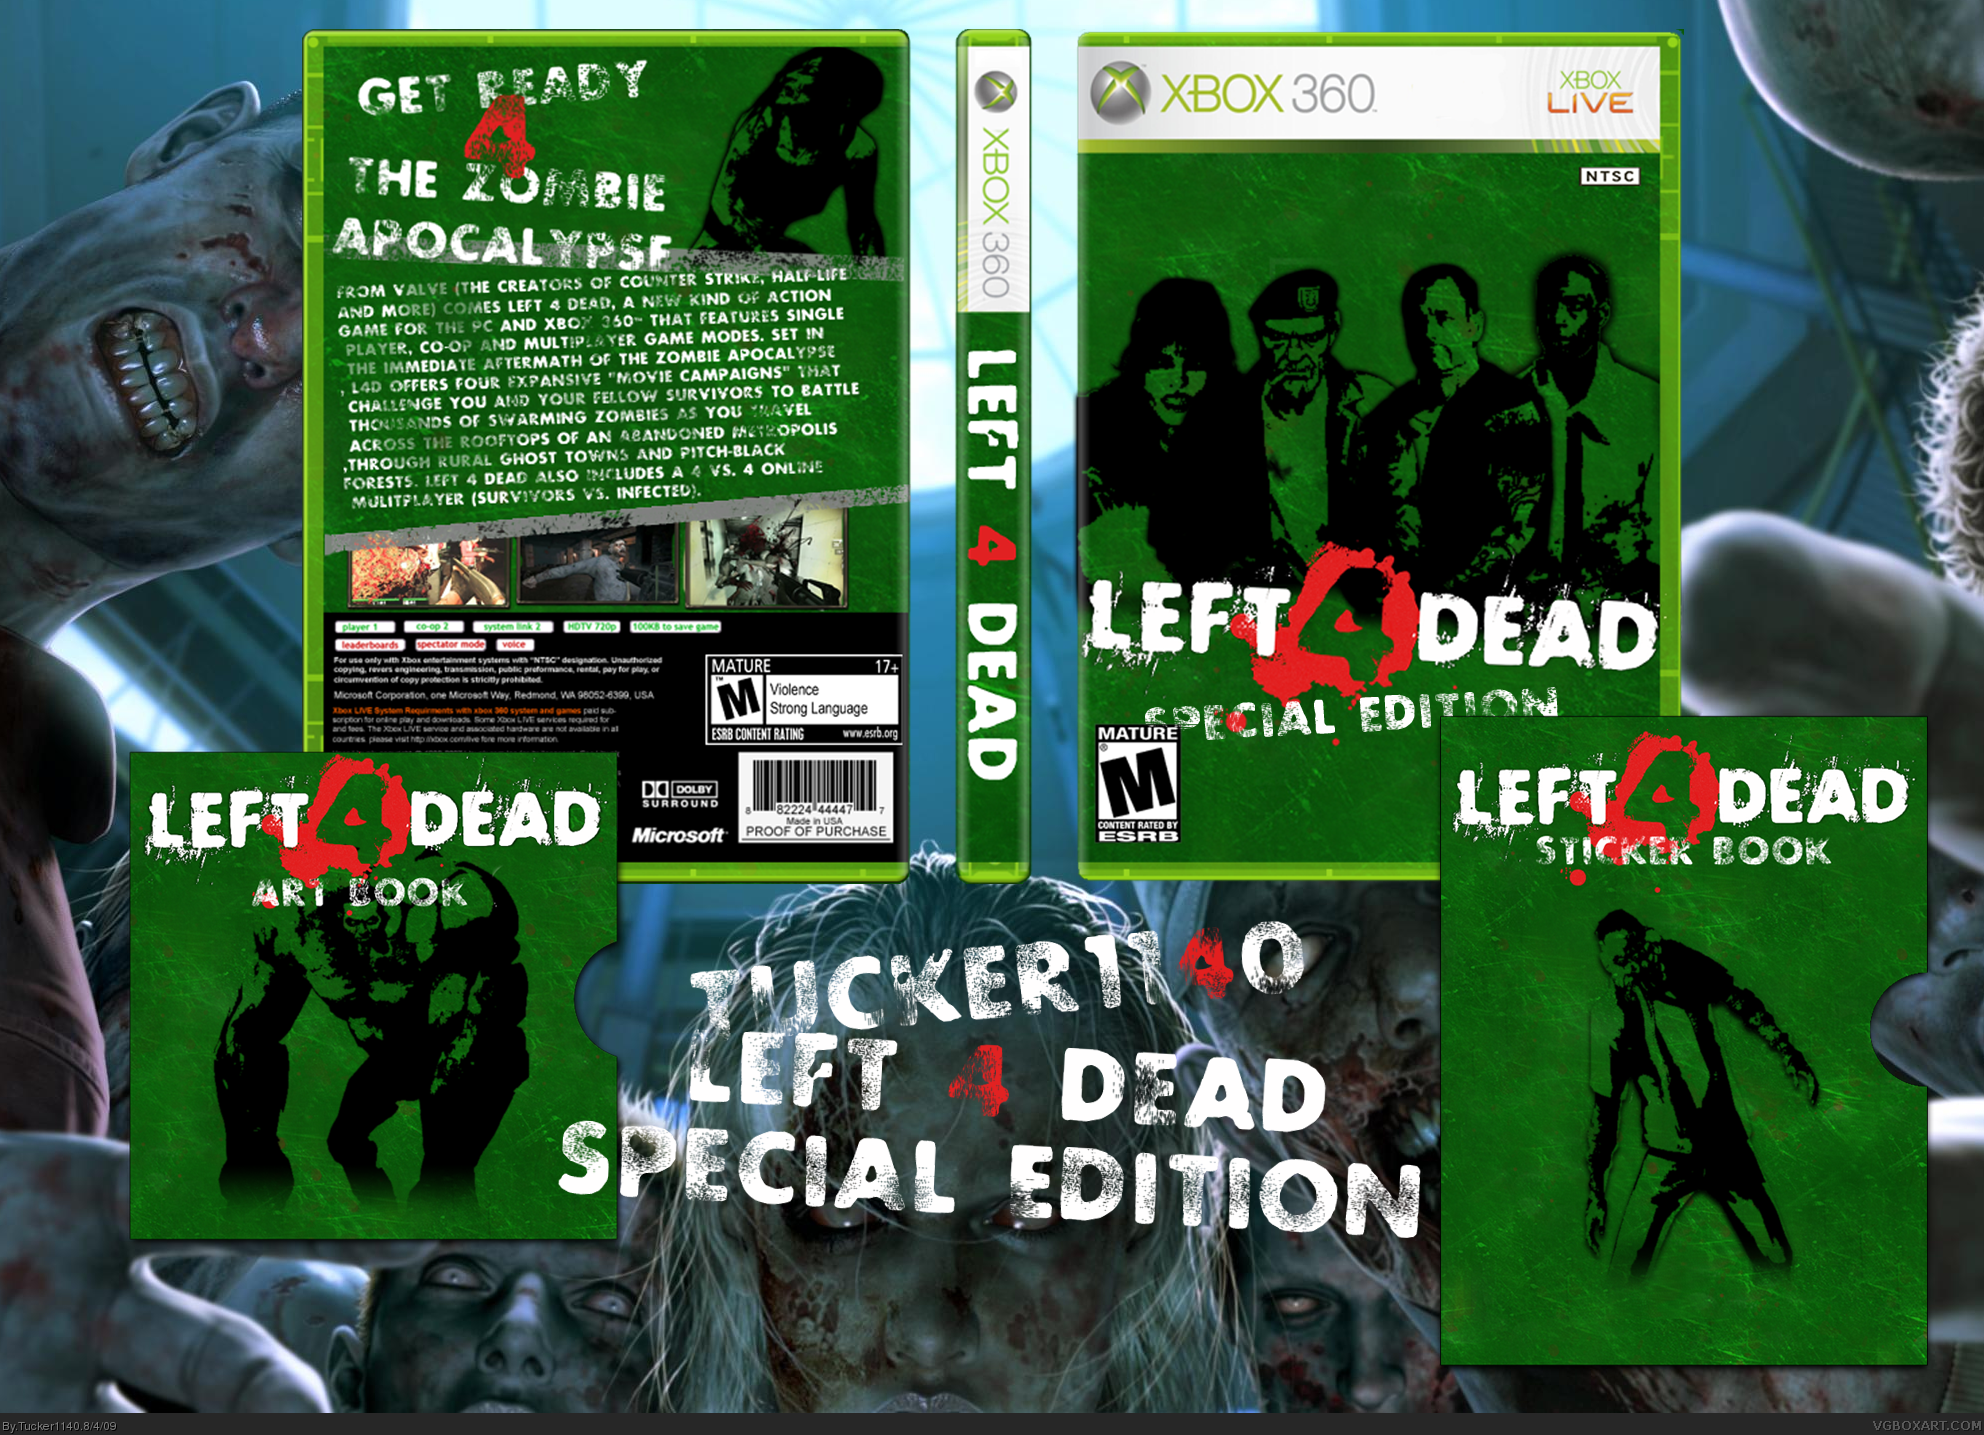 Left 4 Dead: Special Edition box cover